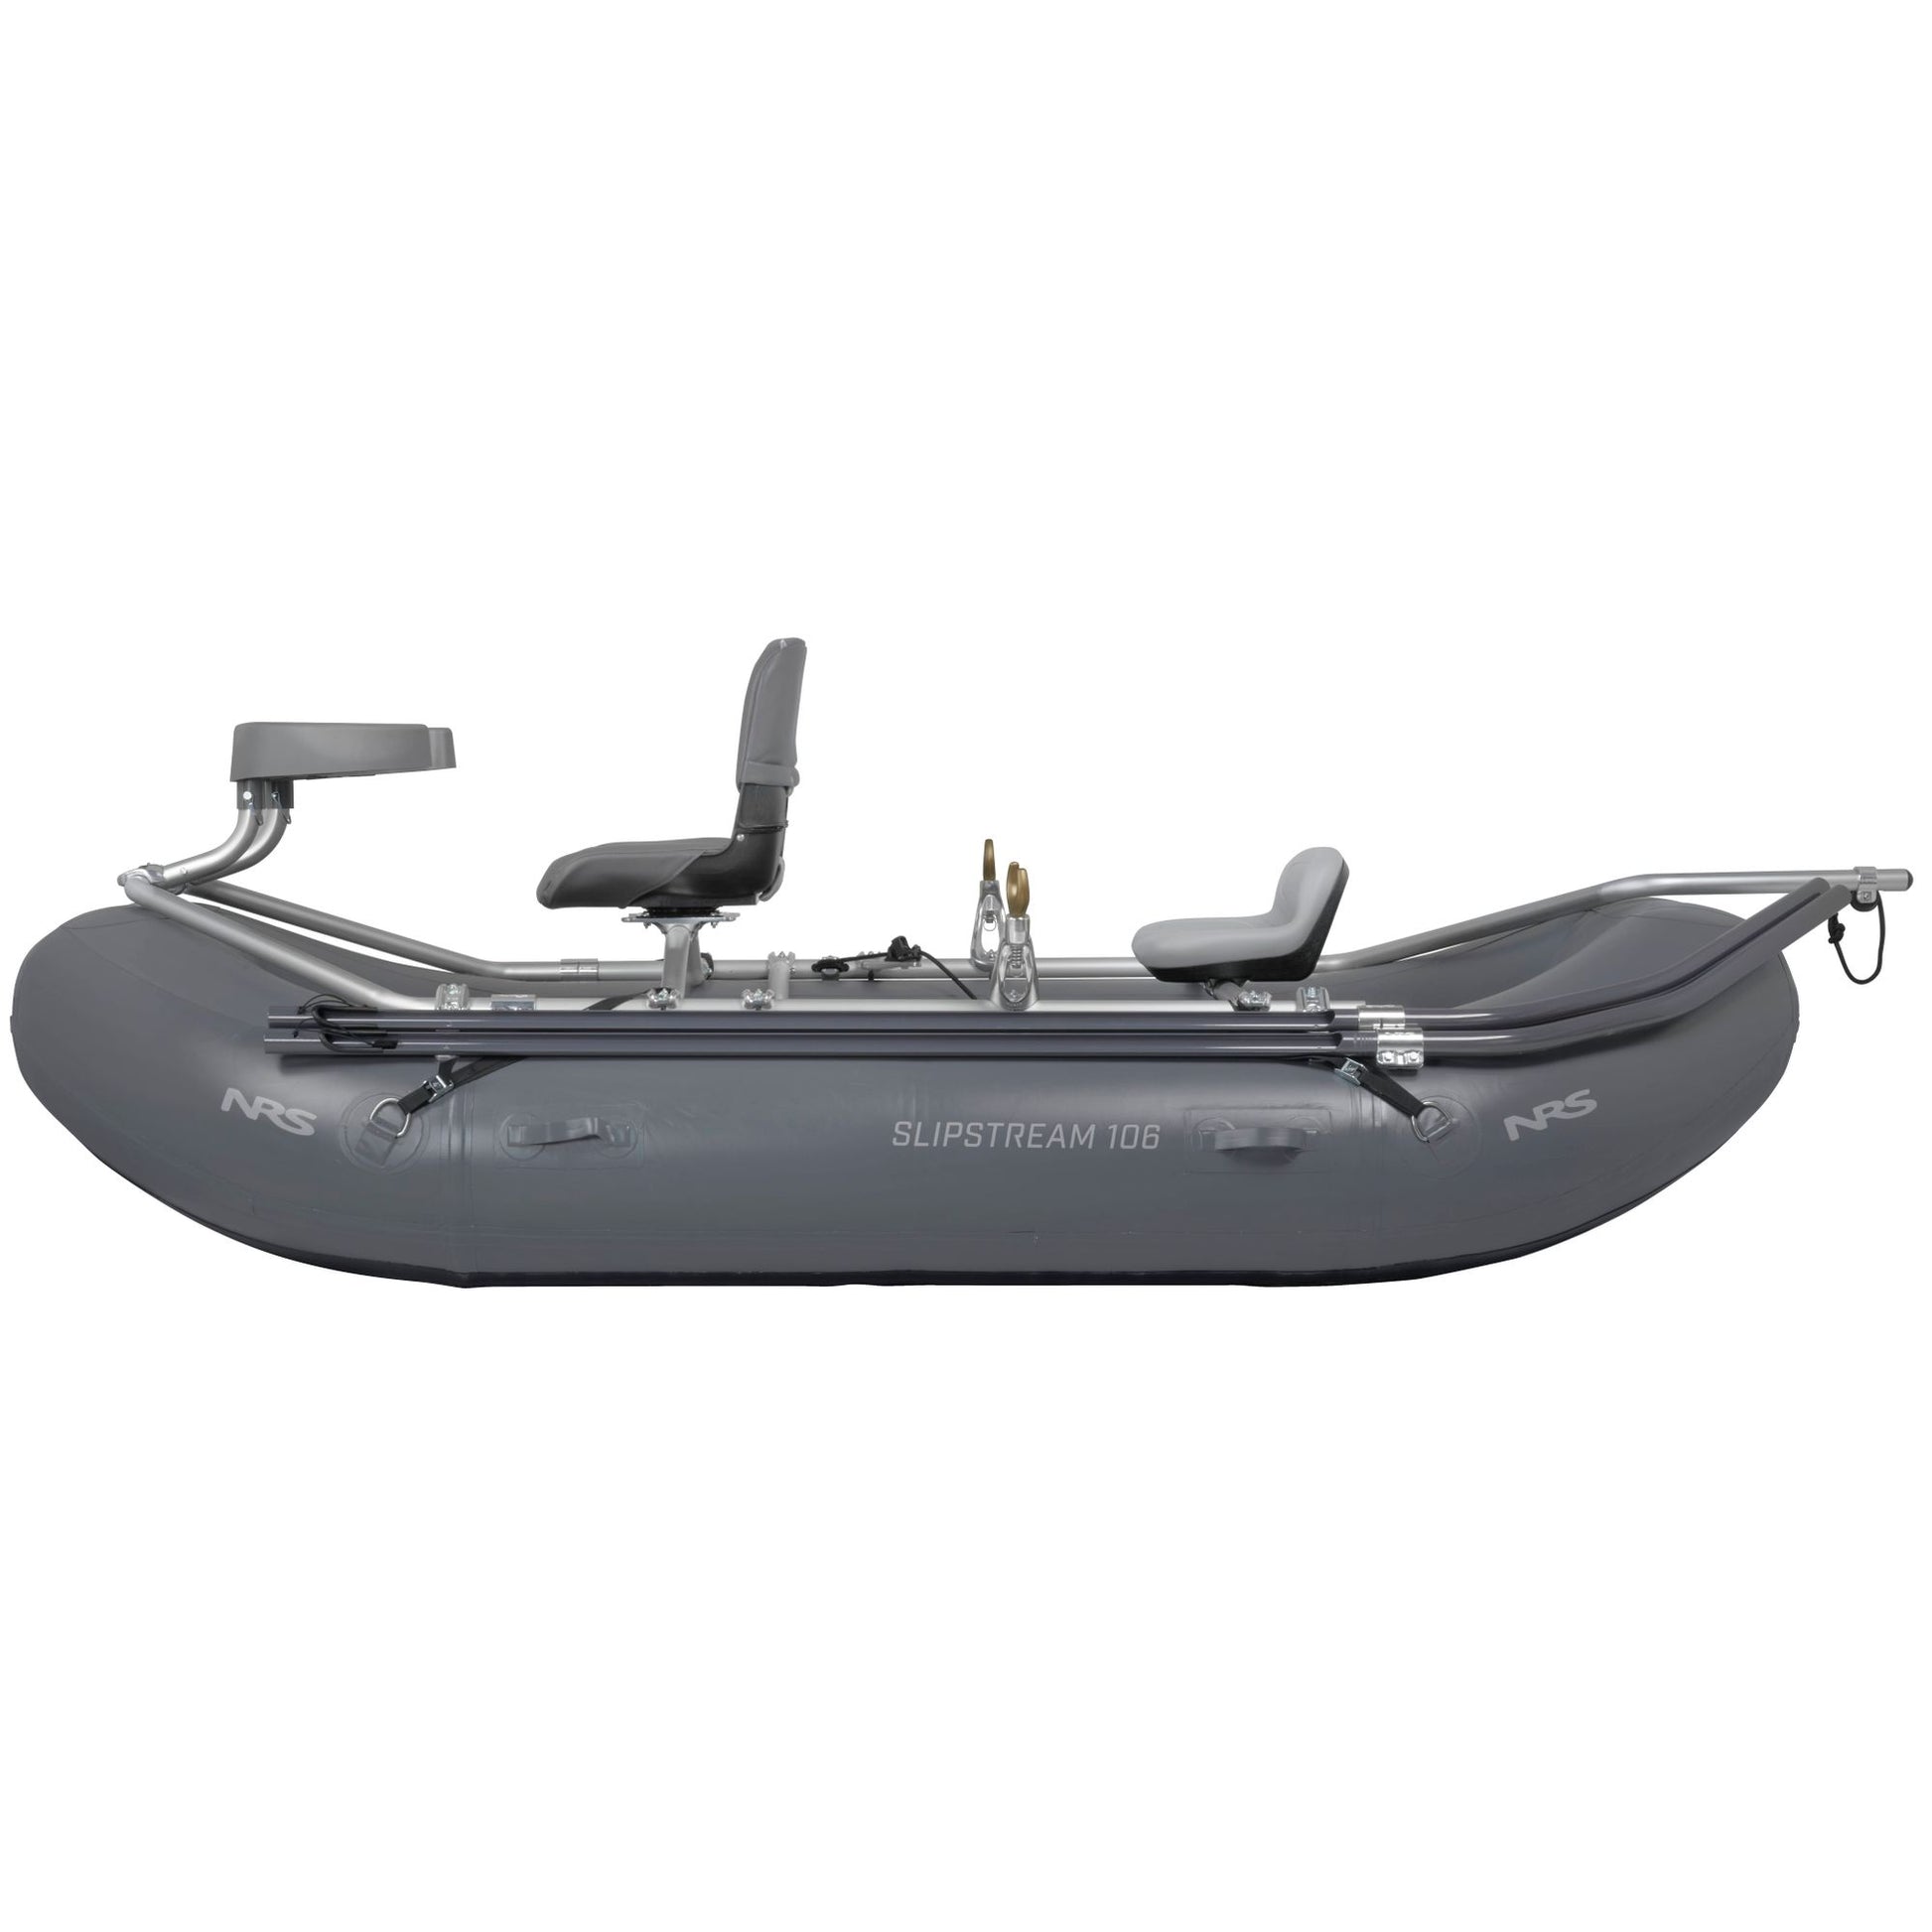 A gray Slipstream Fishing Raft, whitewater-engineered with two seats and a fishing seat.